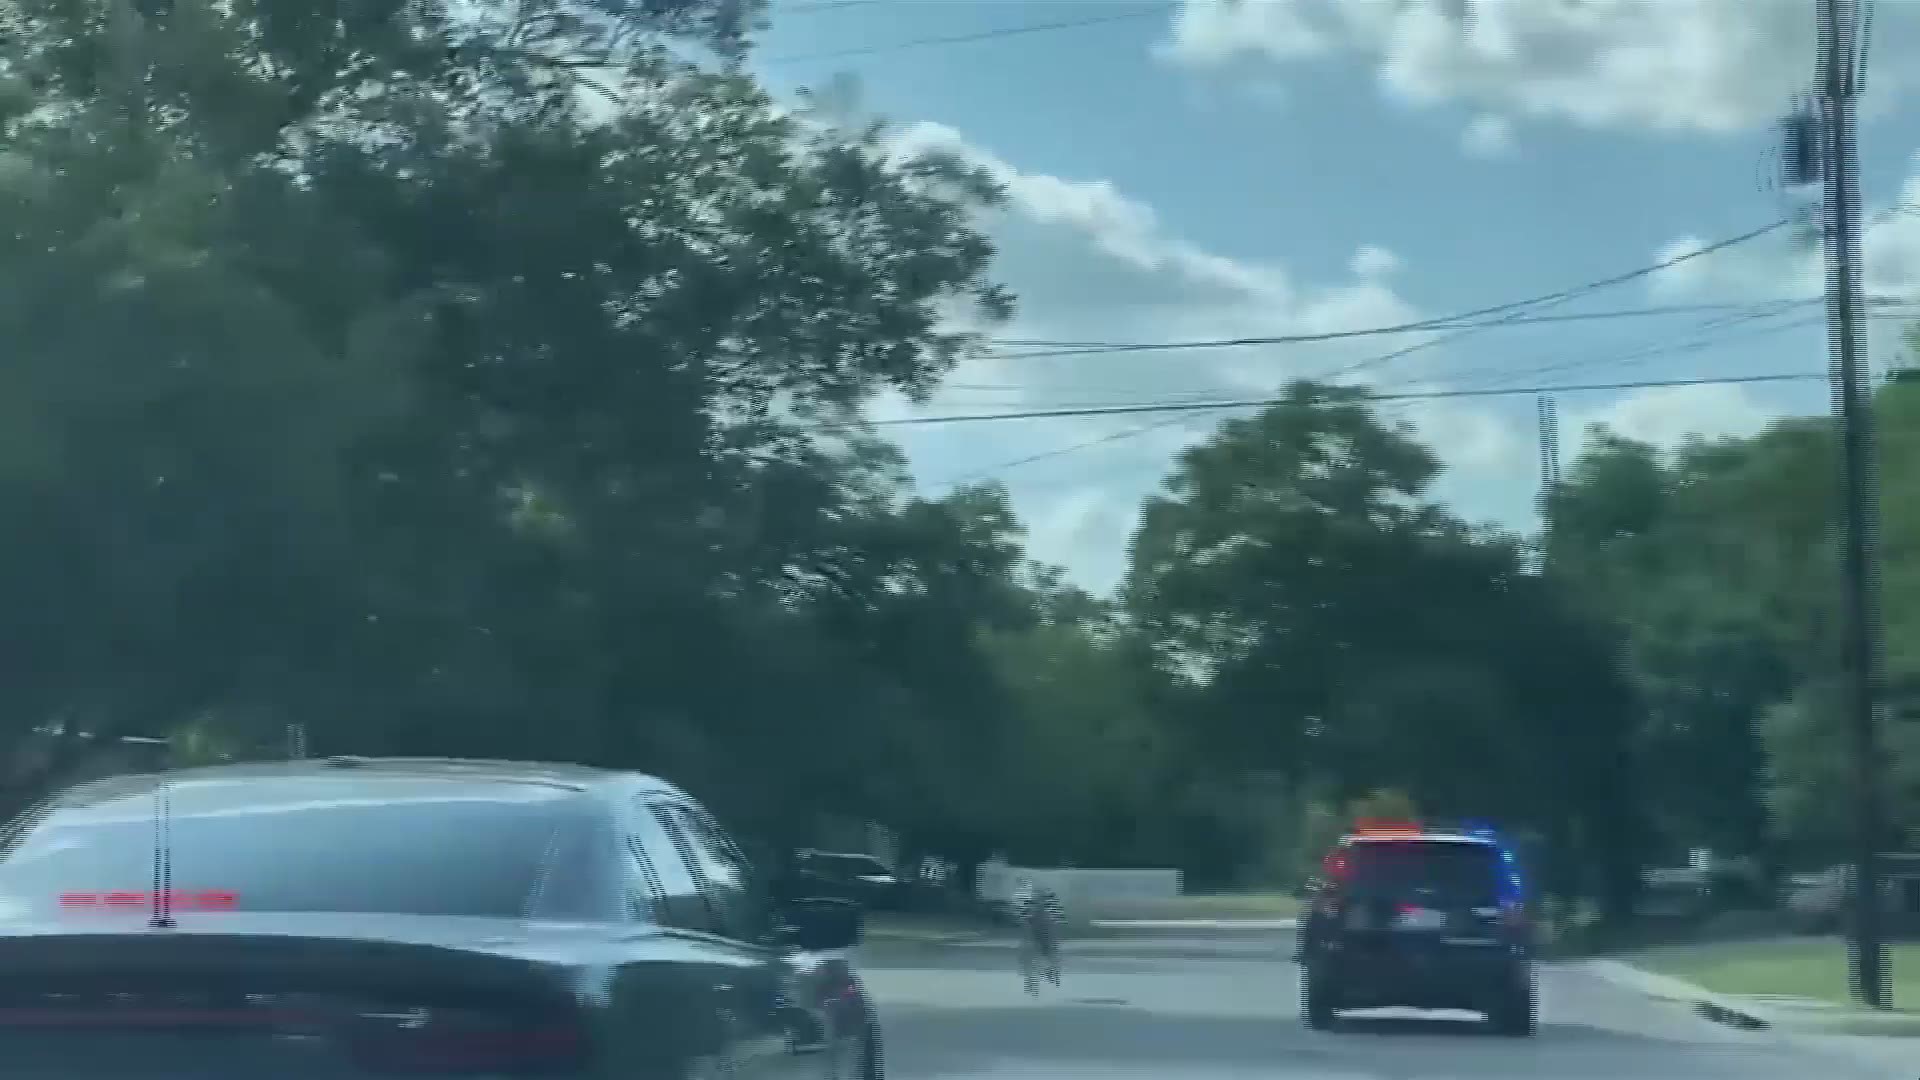 Two zebras led police on a wild chase through New Braunfels, but later died after they were caught. Luis De Leon spoke to a veterinarian about a possible cause.